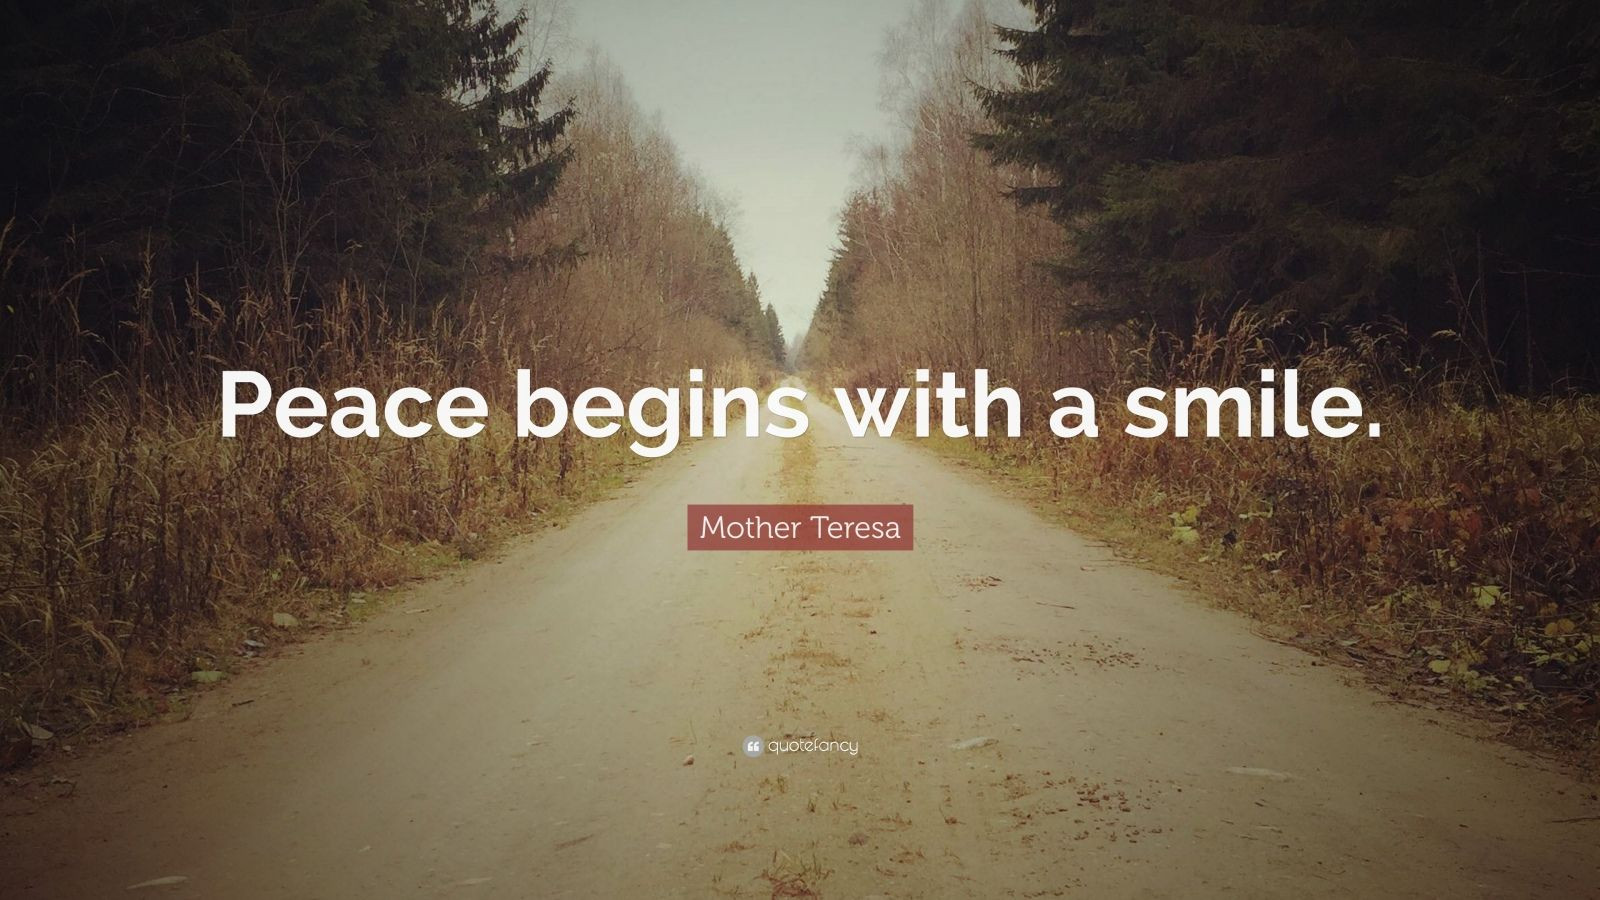 Mother Teresa Peace Quote
 Mother Teresa Quote “Peace begins with a smile ” 25